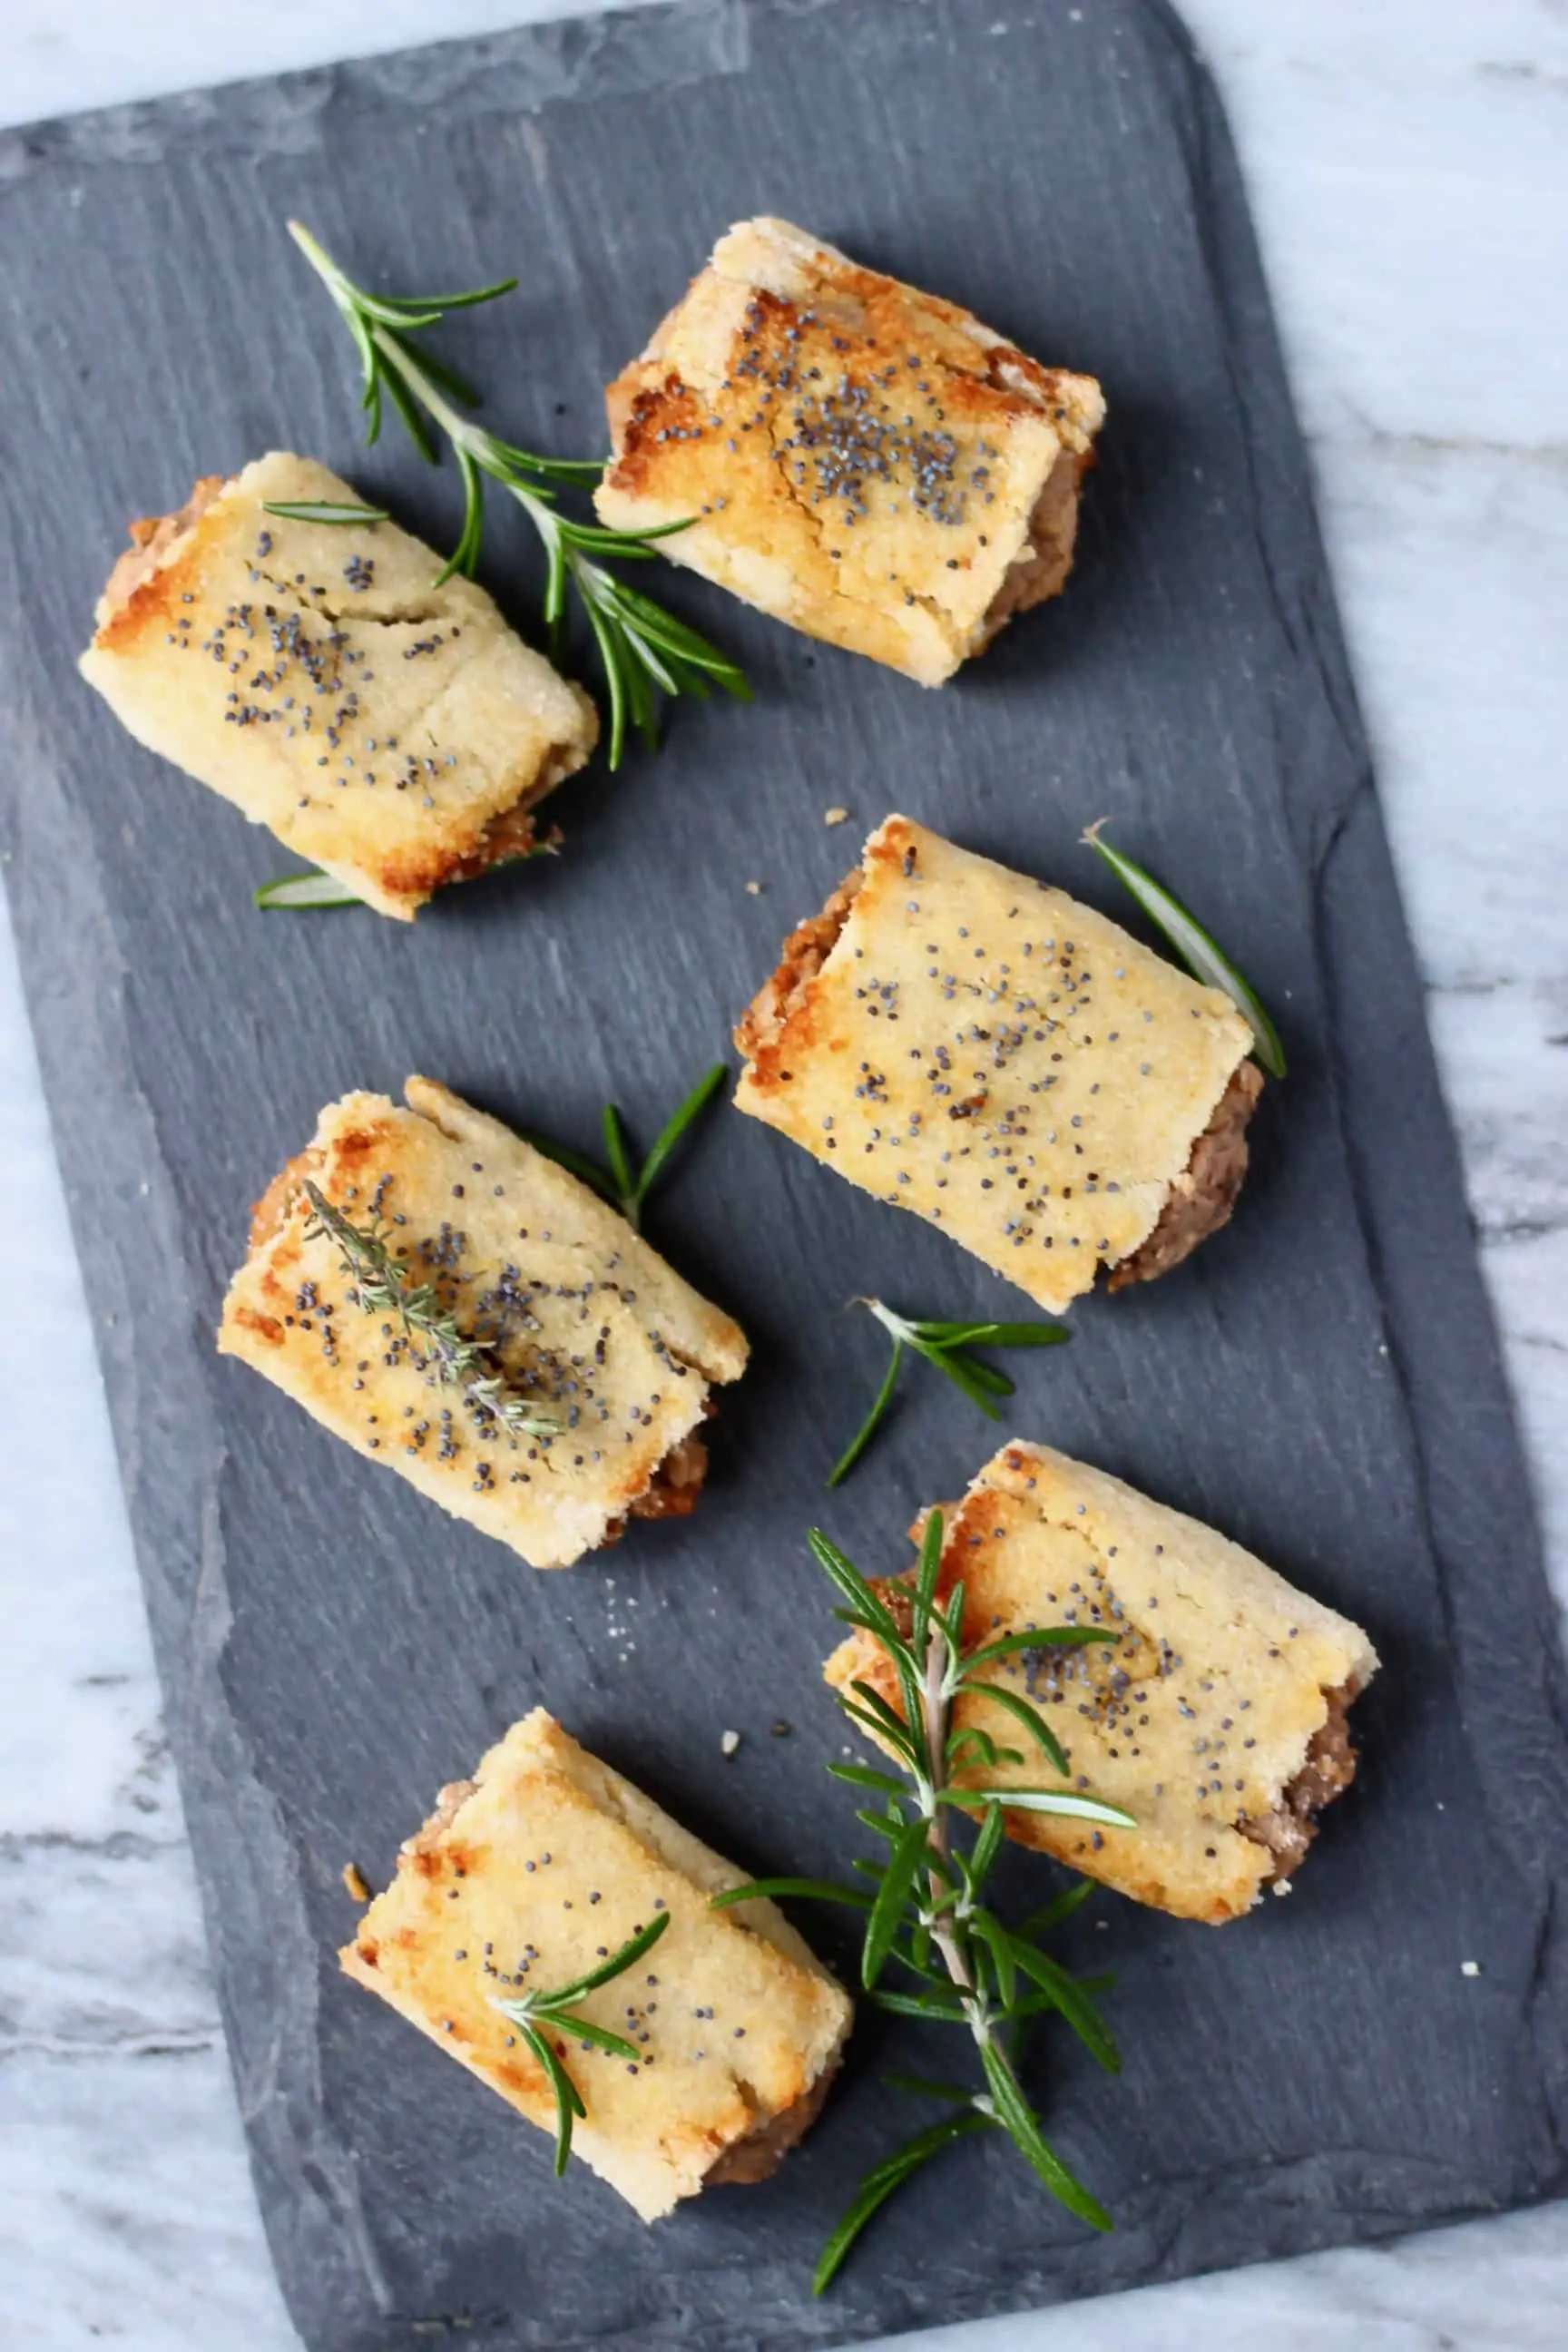 Six vegan sausage rolls on a black slab decorated with sprigs of rosemary